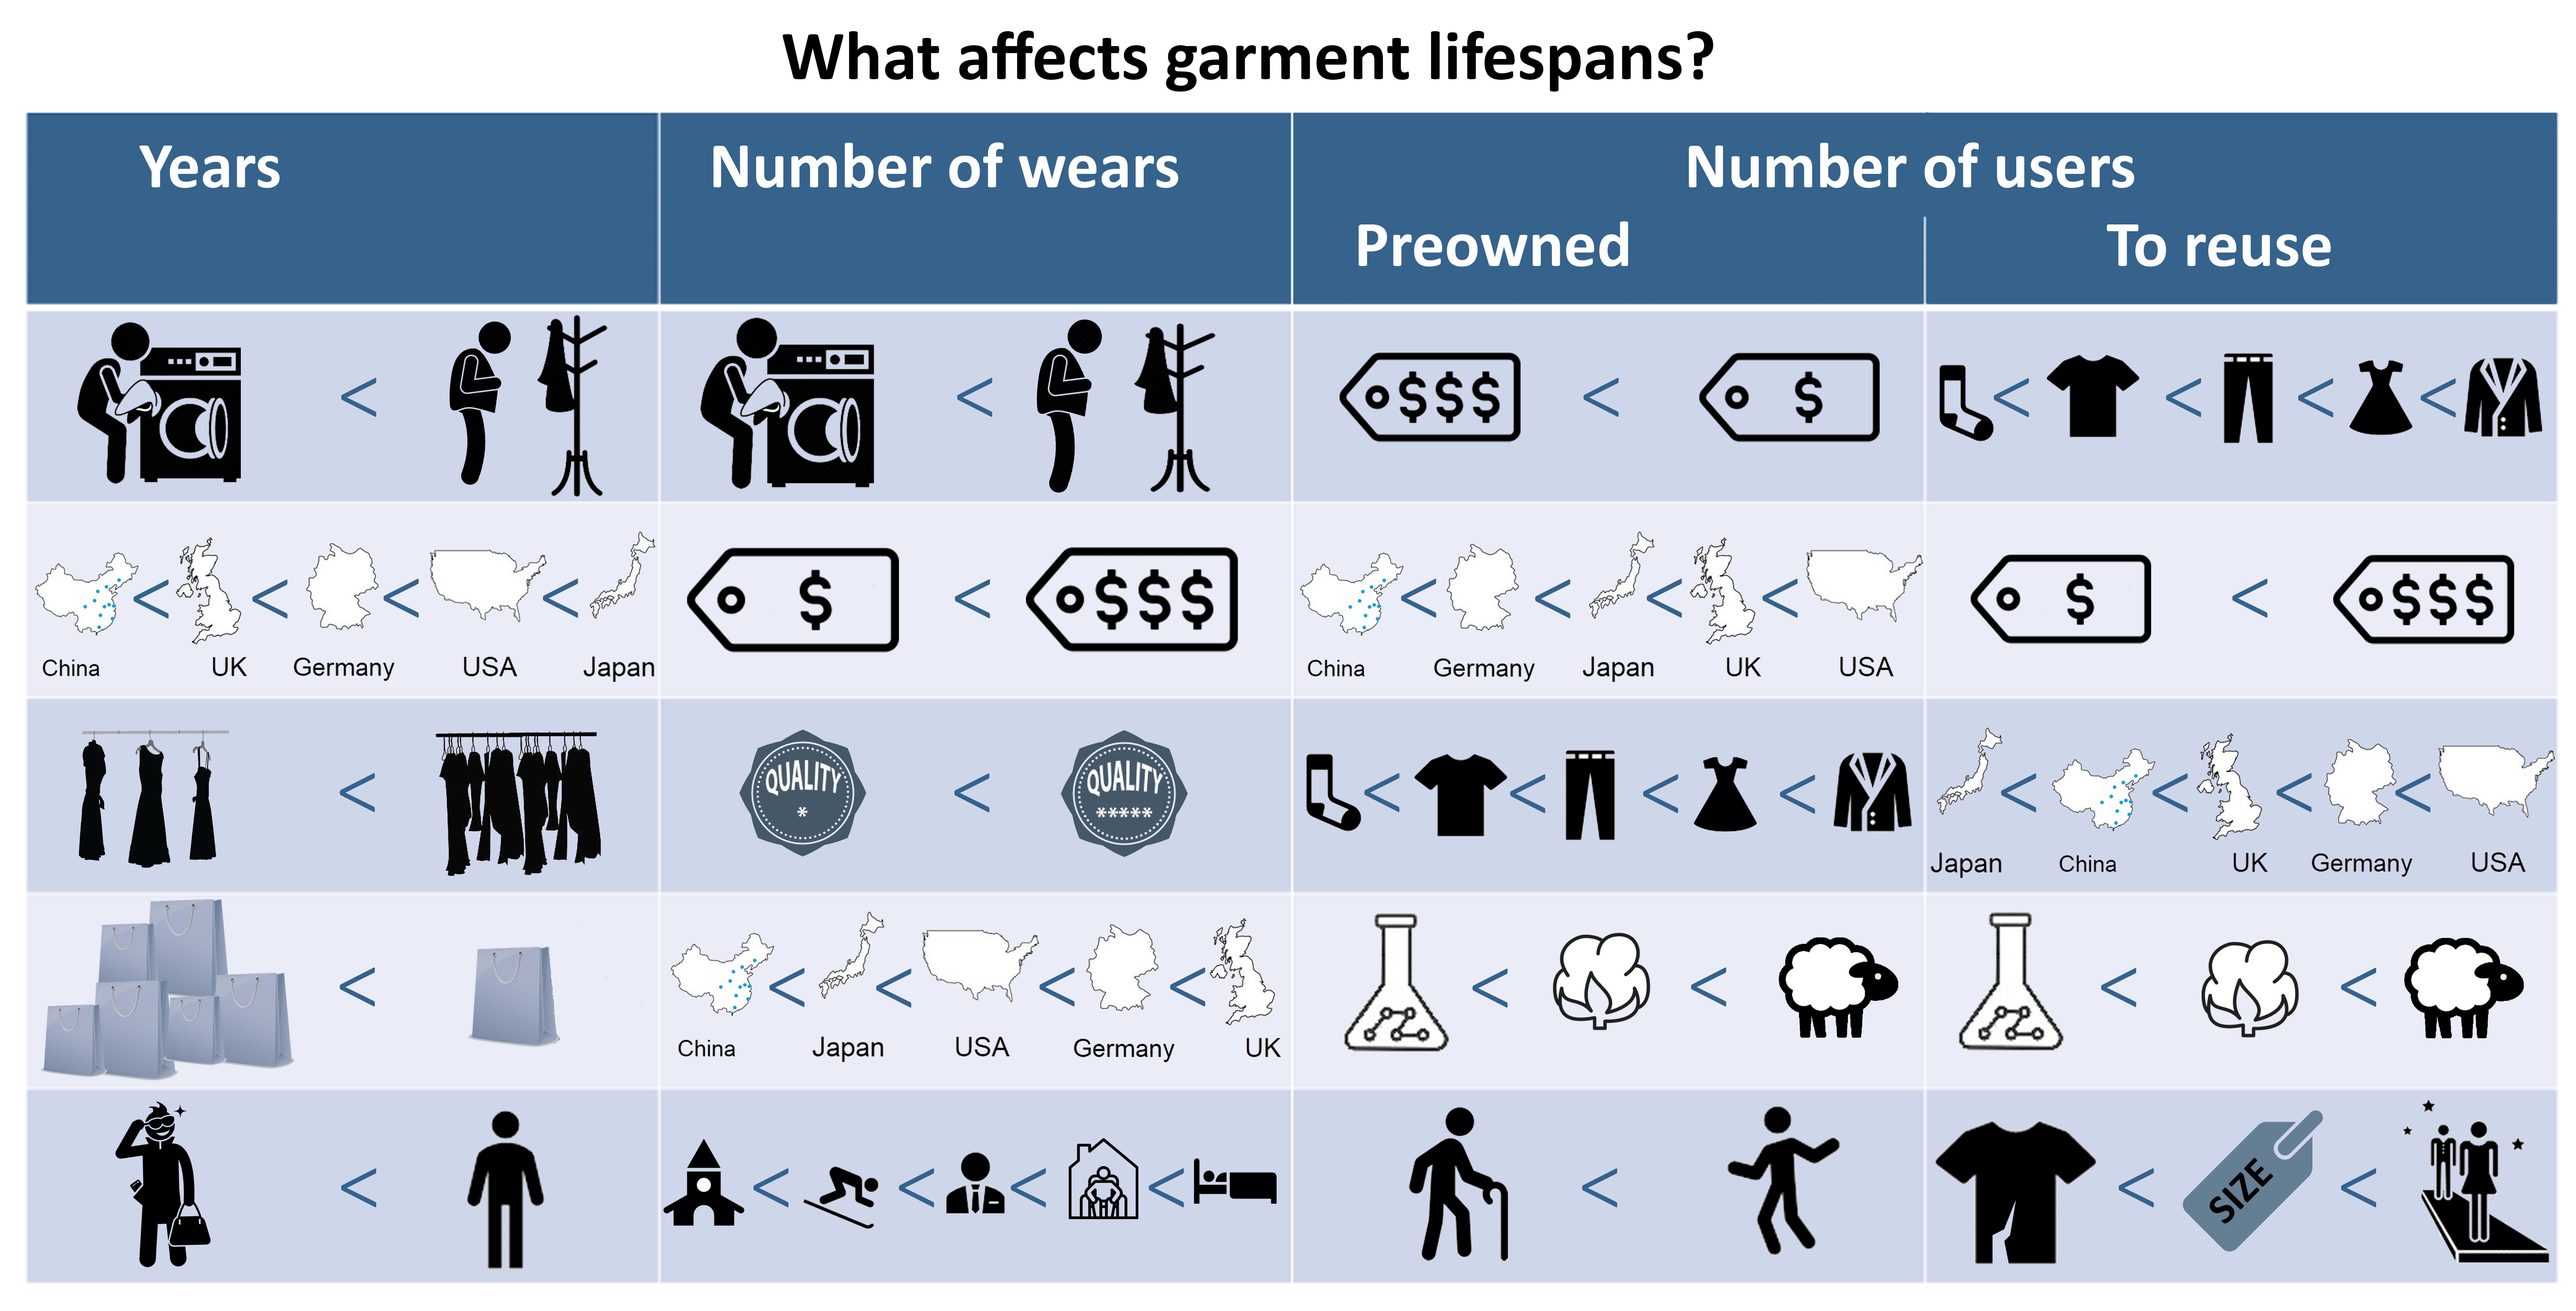 Graphical abstract that summarises some of the main findings of the article - what affects garments' lifespans most when measured in years, number of wears or number of users.